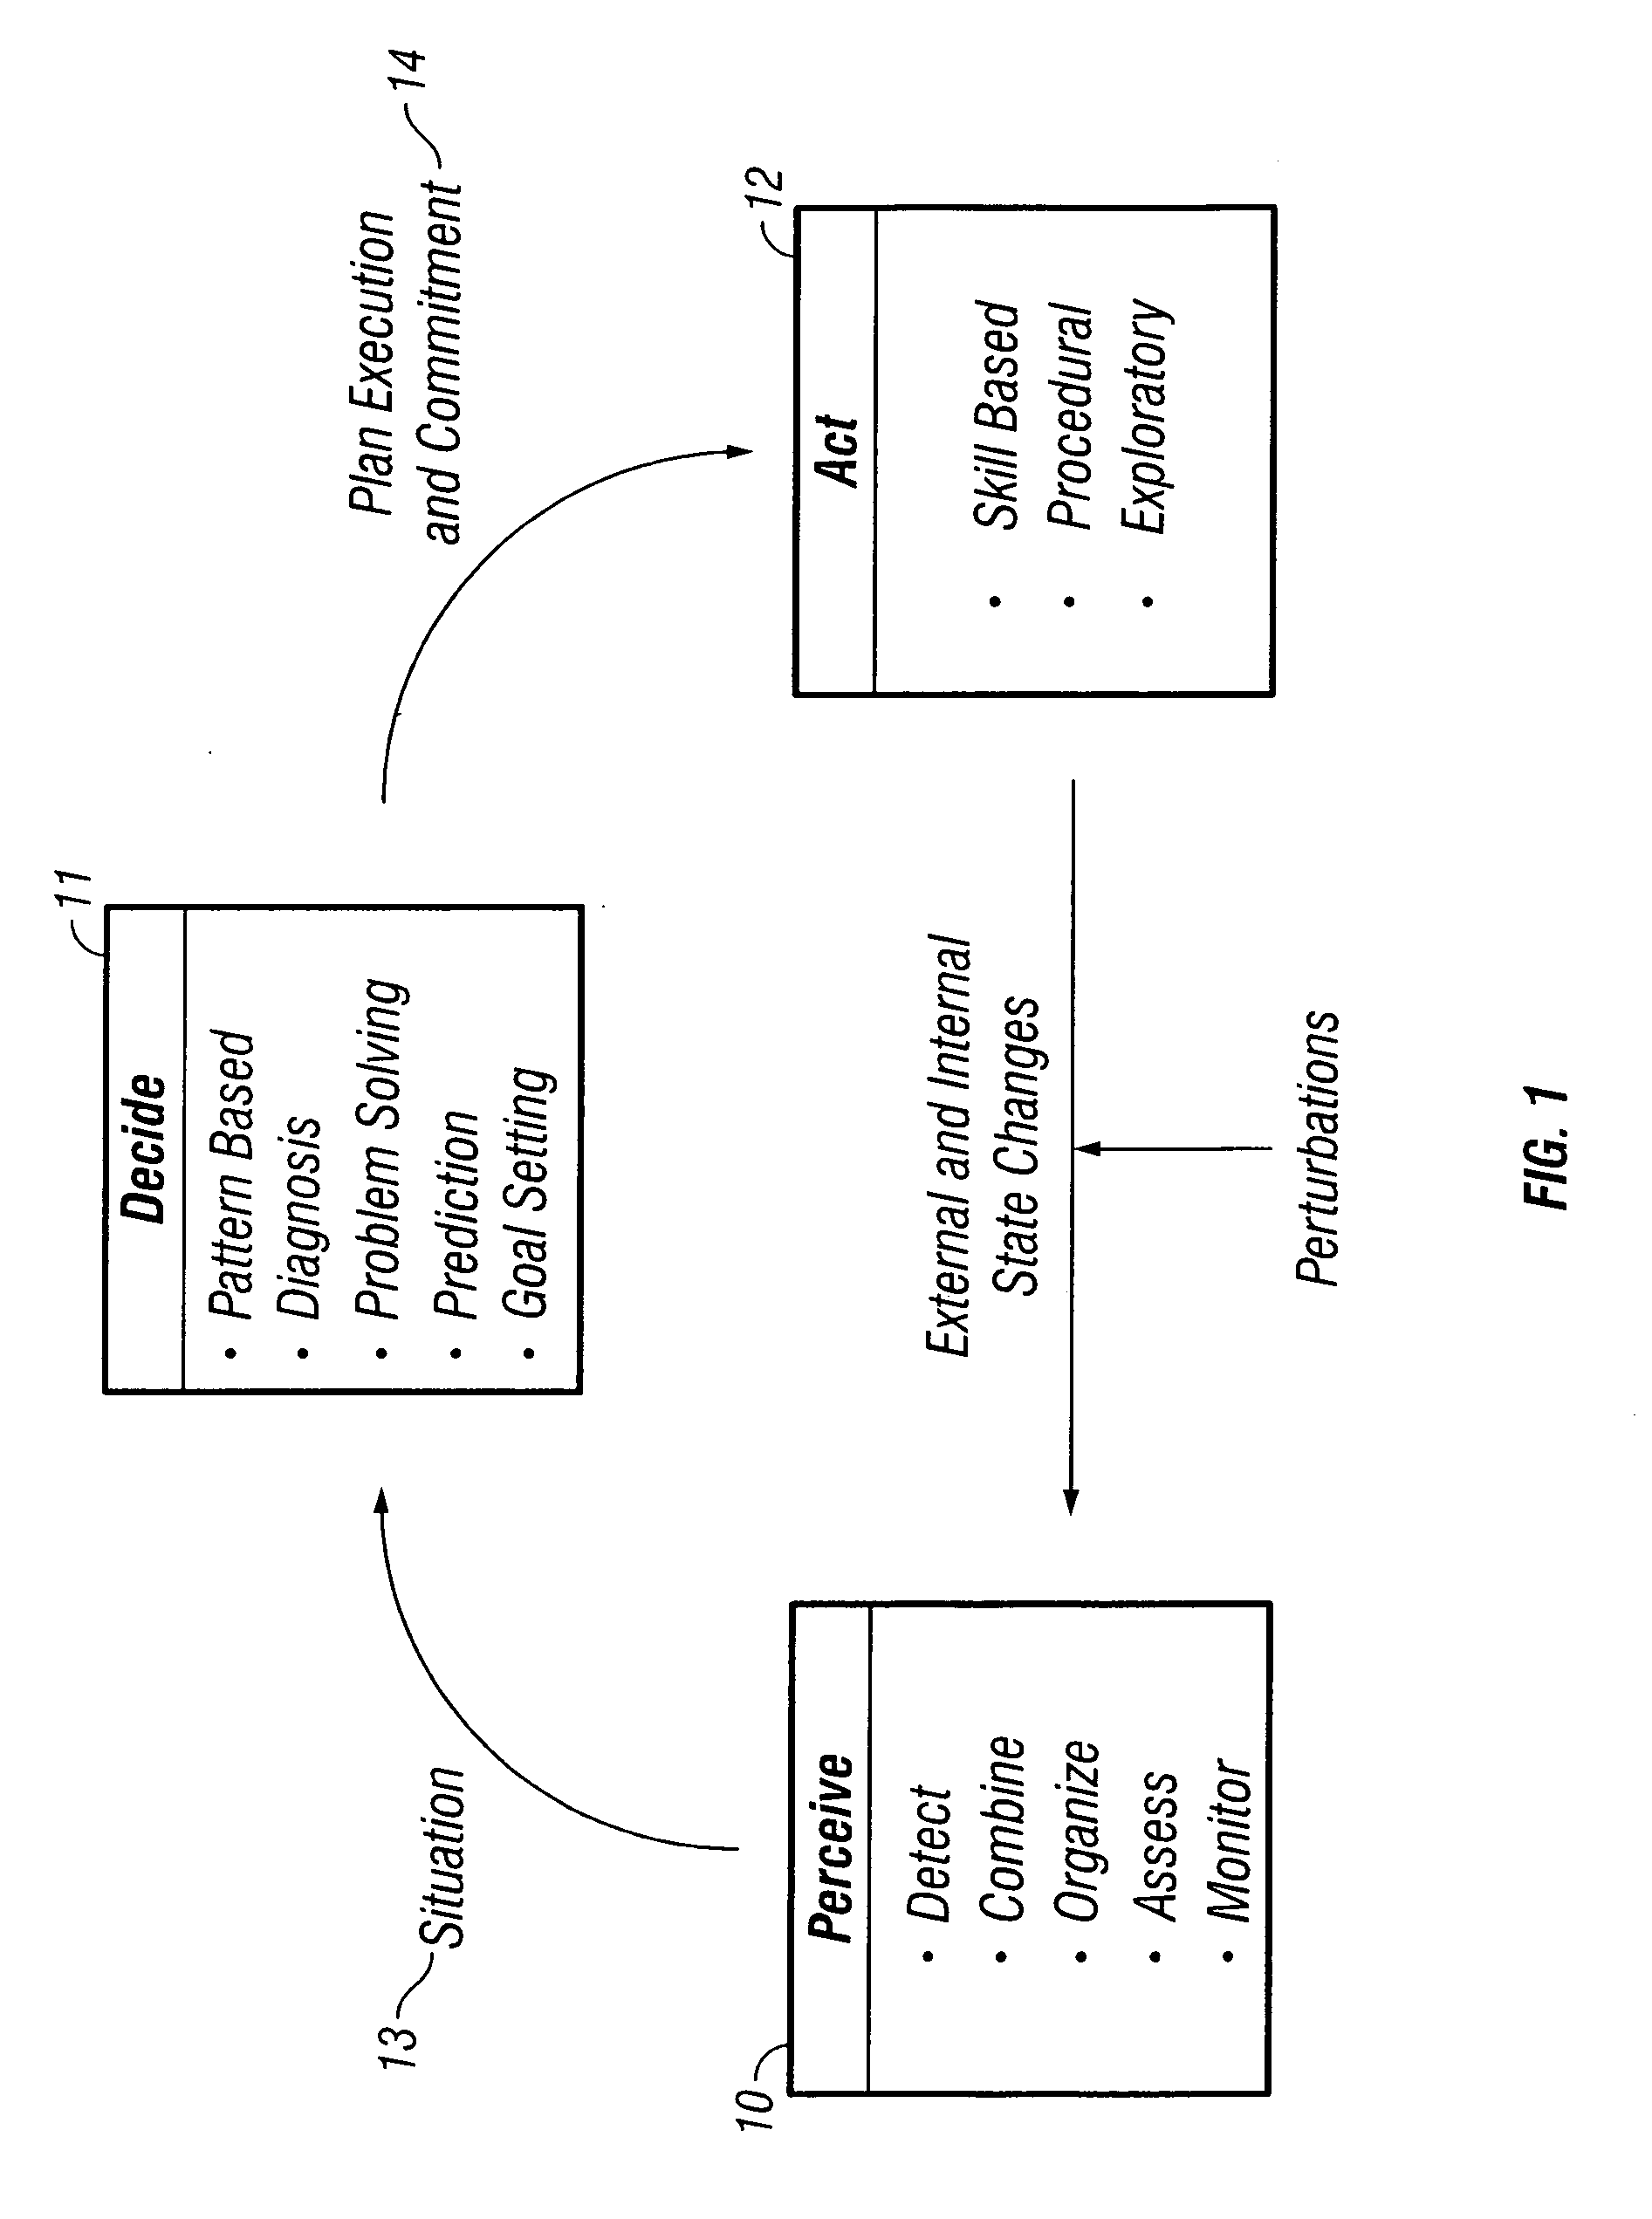 Apparatus and method for an autonomous robotic system for performing activities in a well